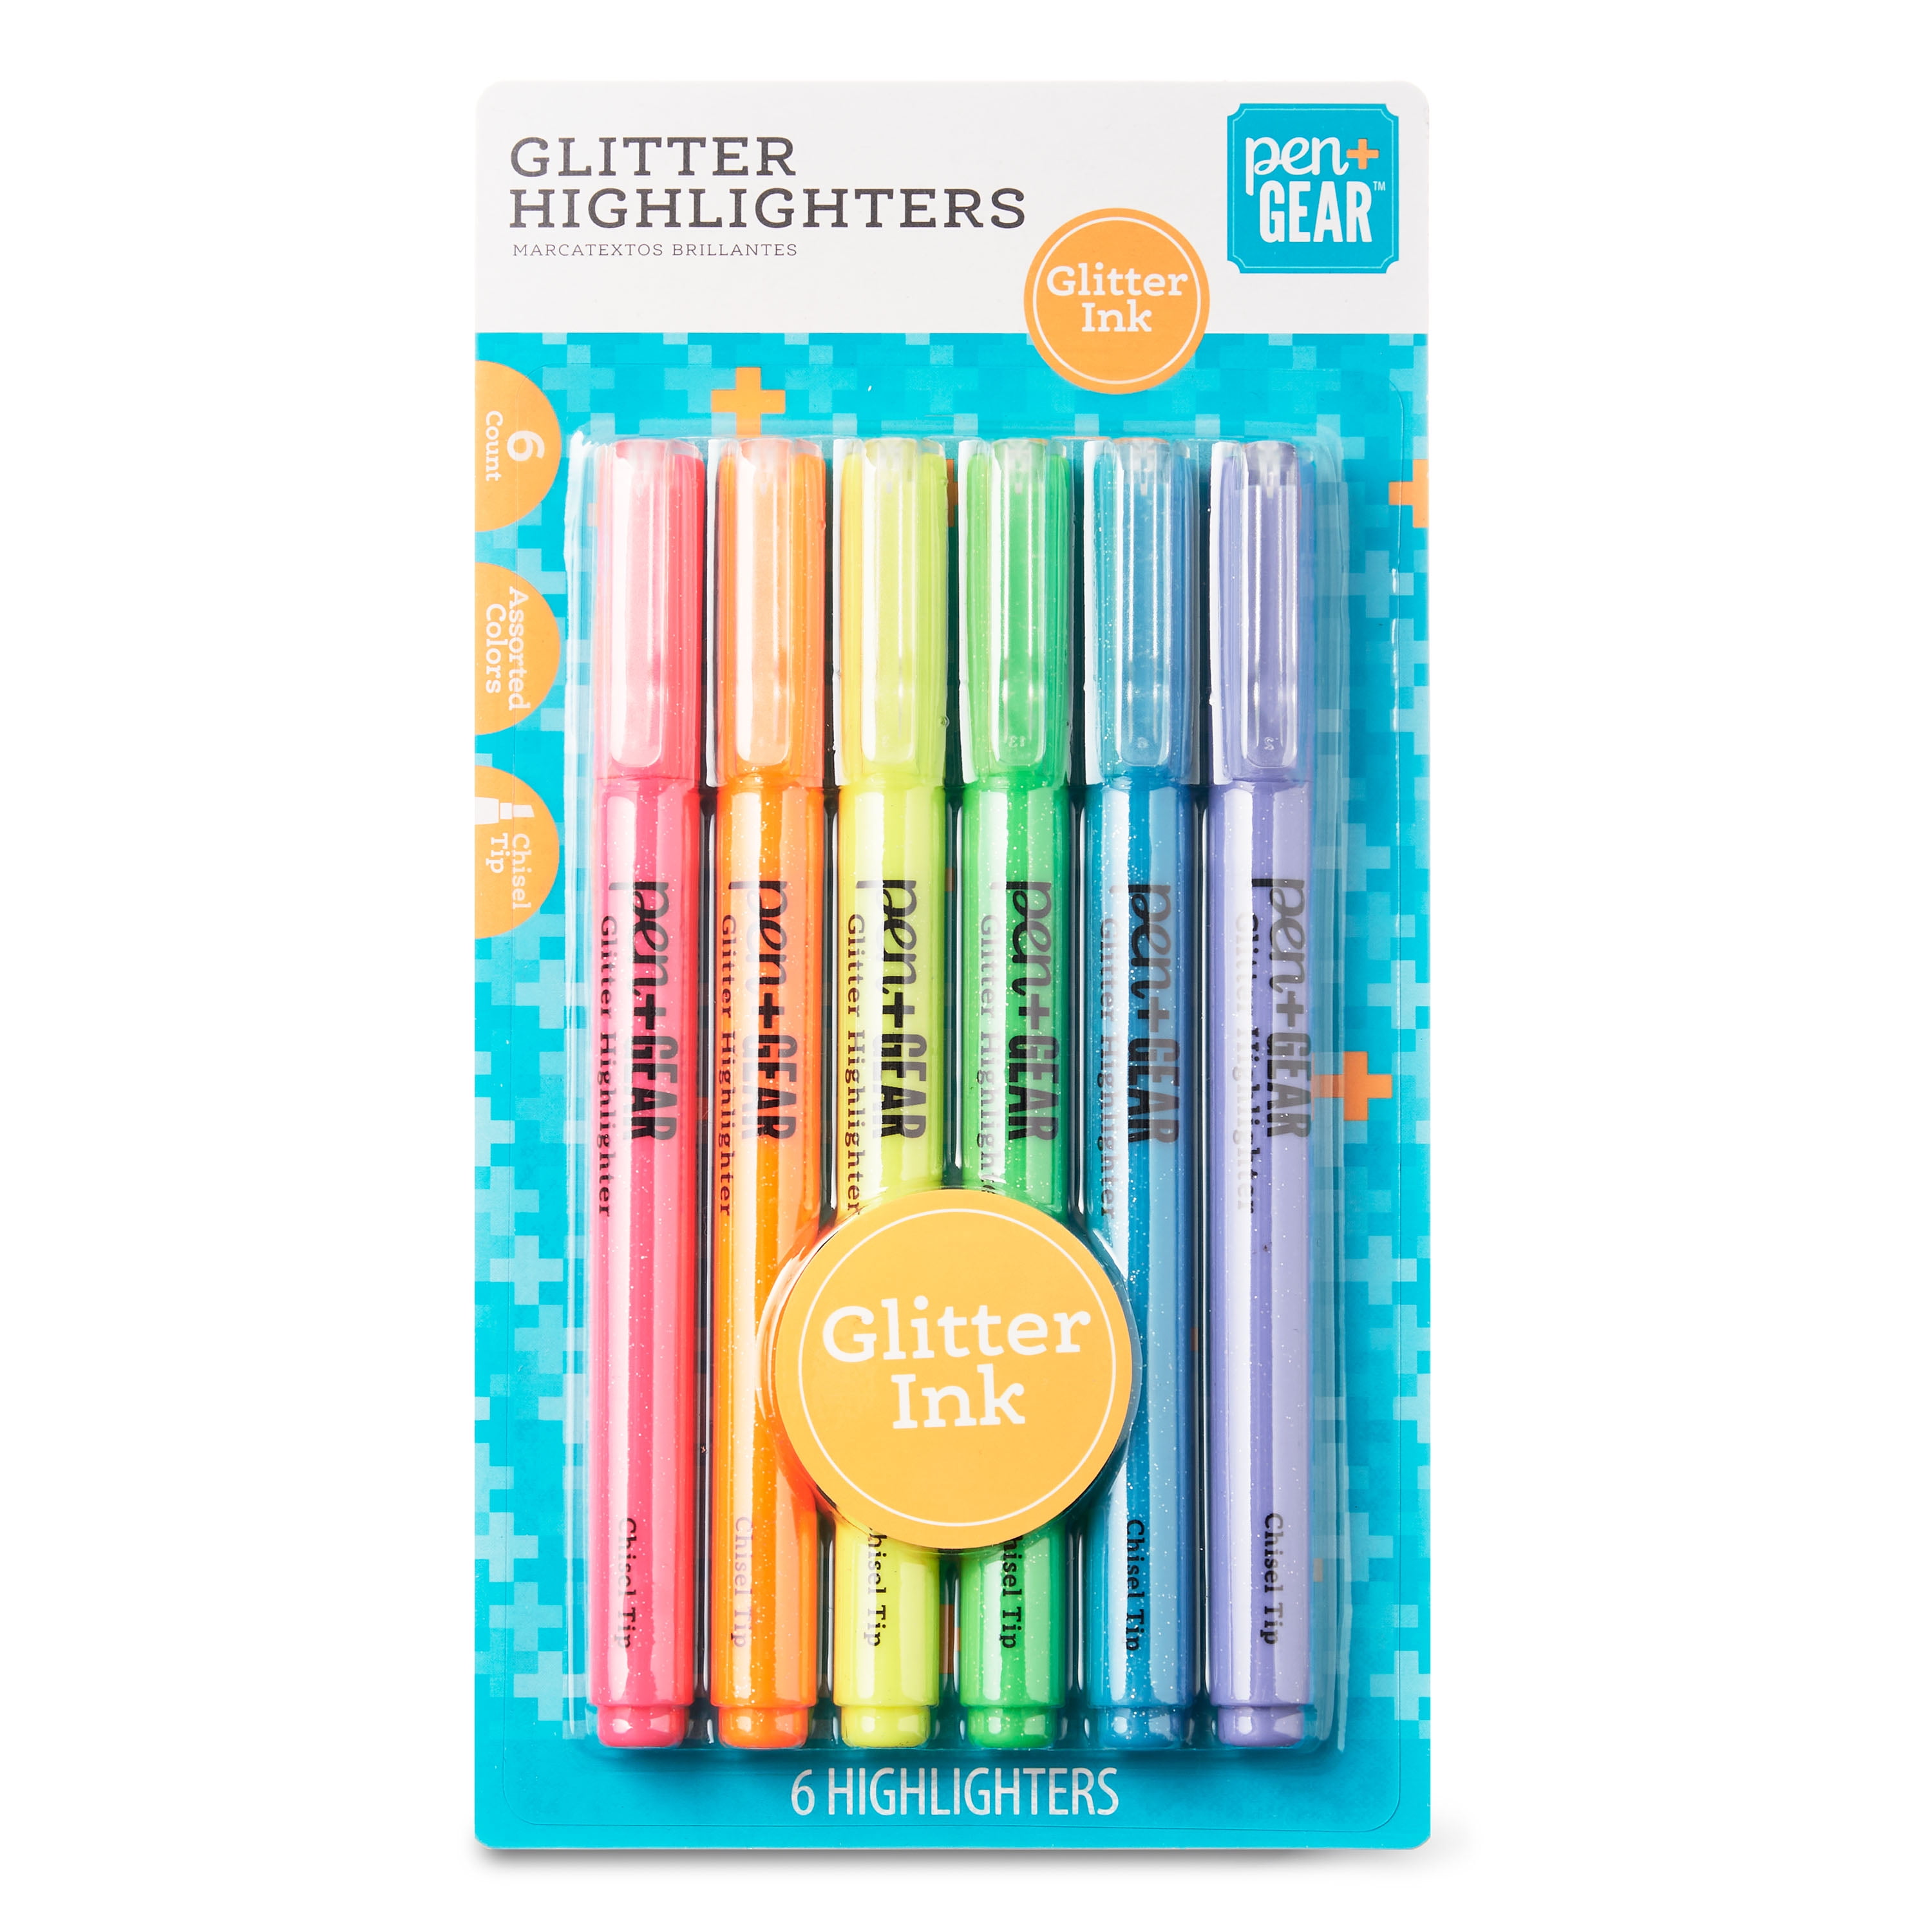 Pen+Gear Glitter Highlighters, Assorted Colors, 6 Pack